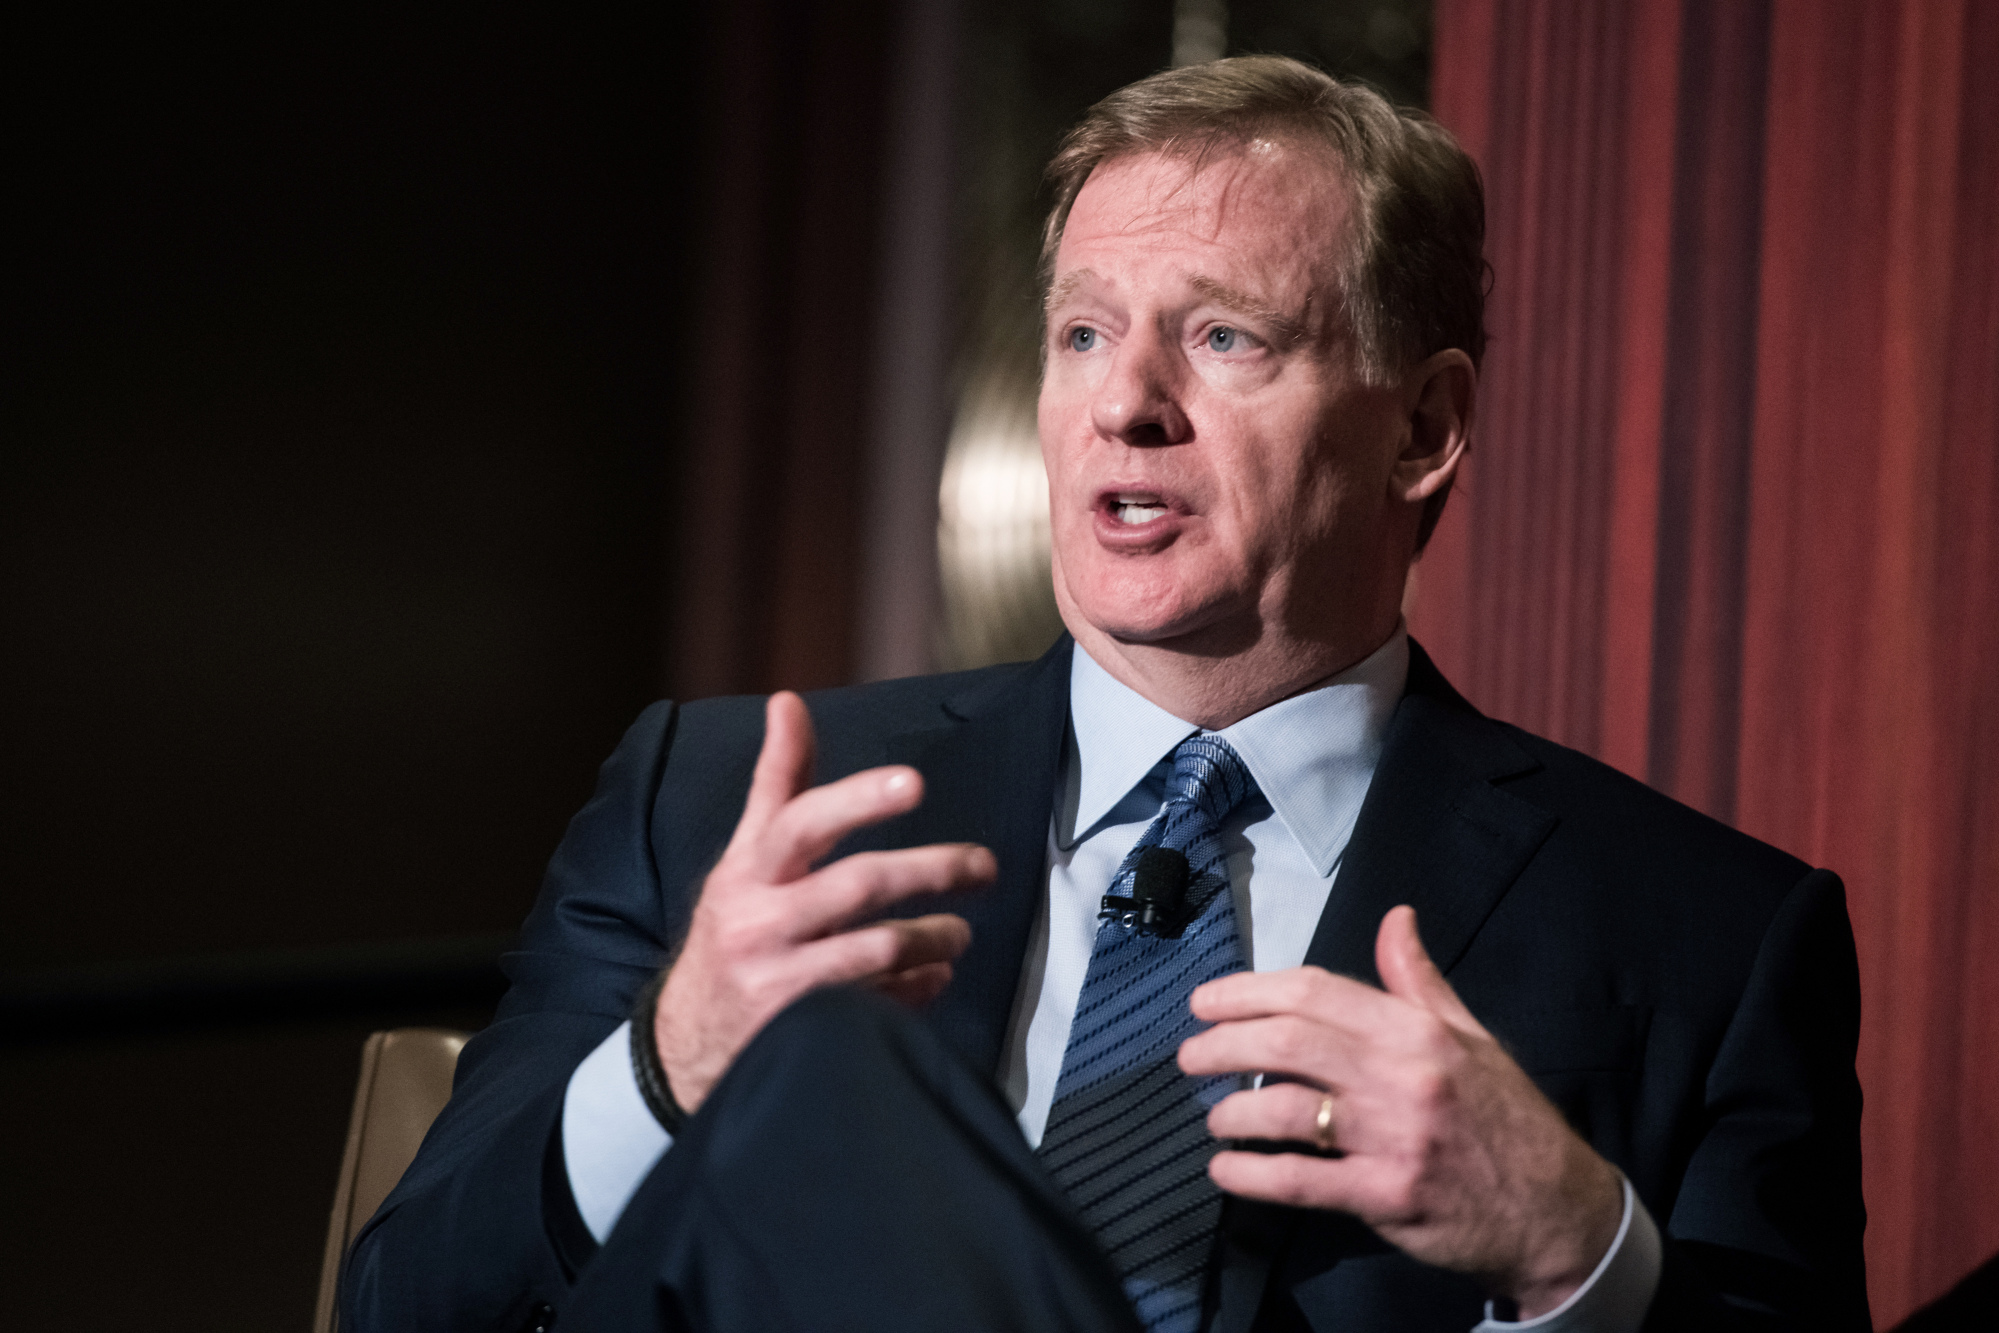 NFL Sunday Ticket May Get Streaming Outlet Says Roger Goodell - Bloomberg